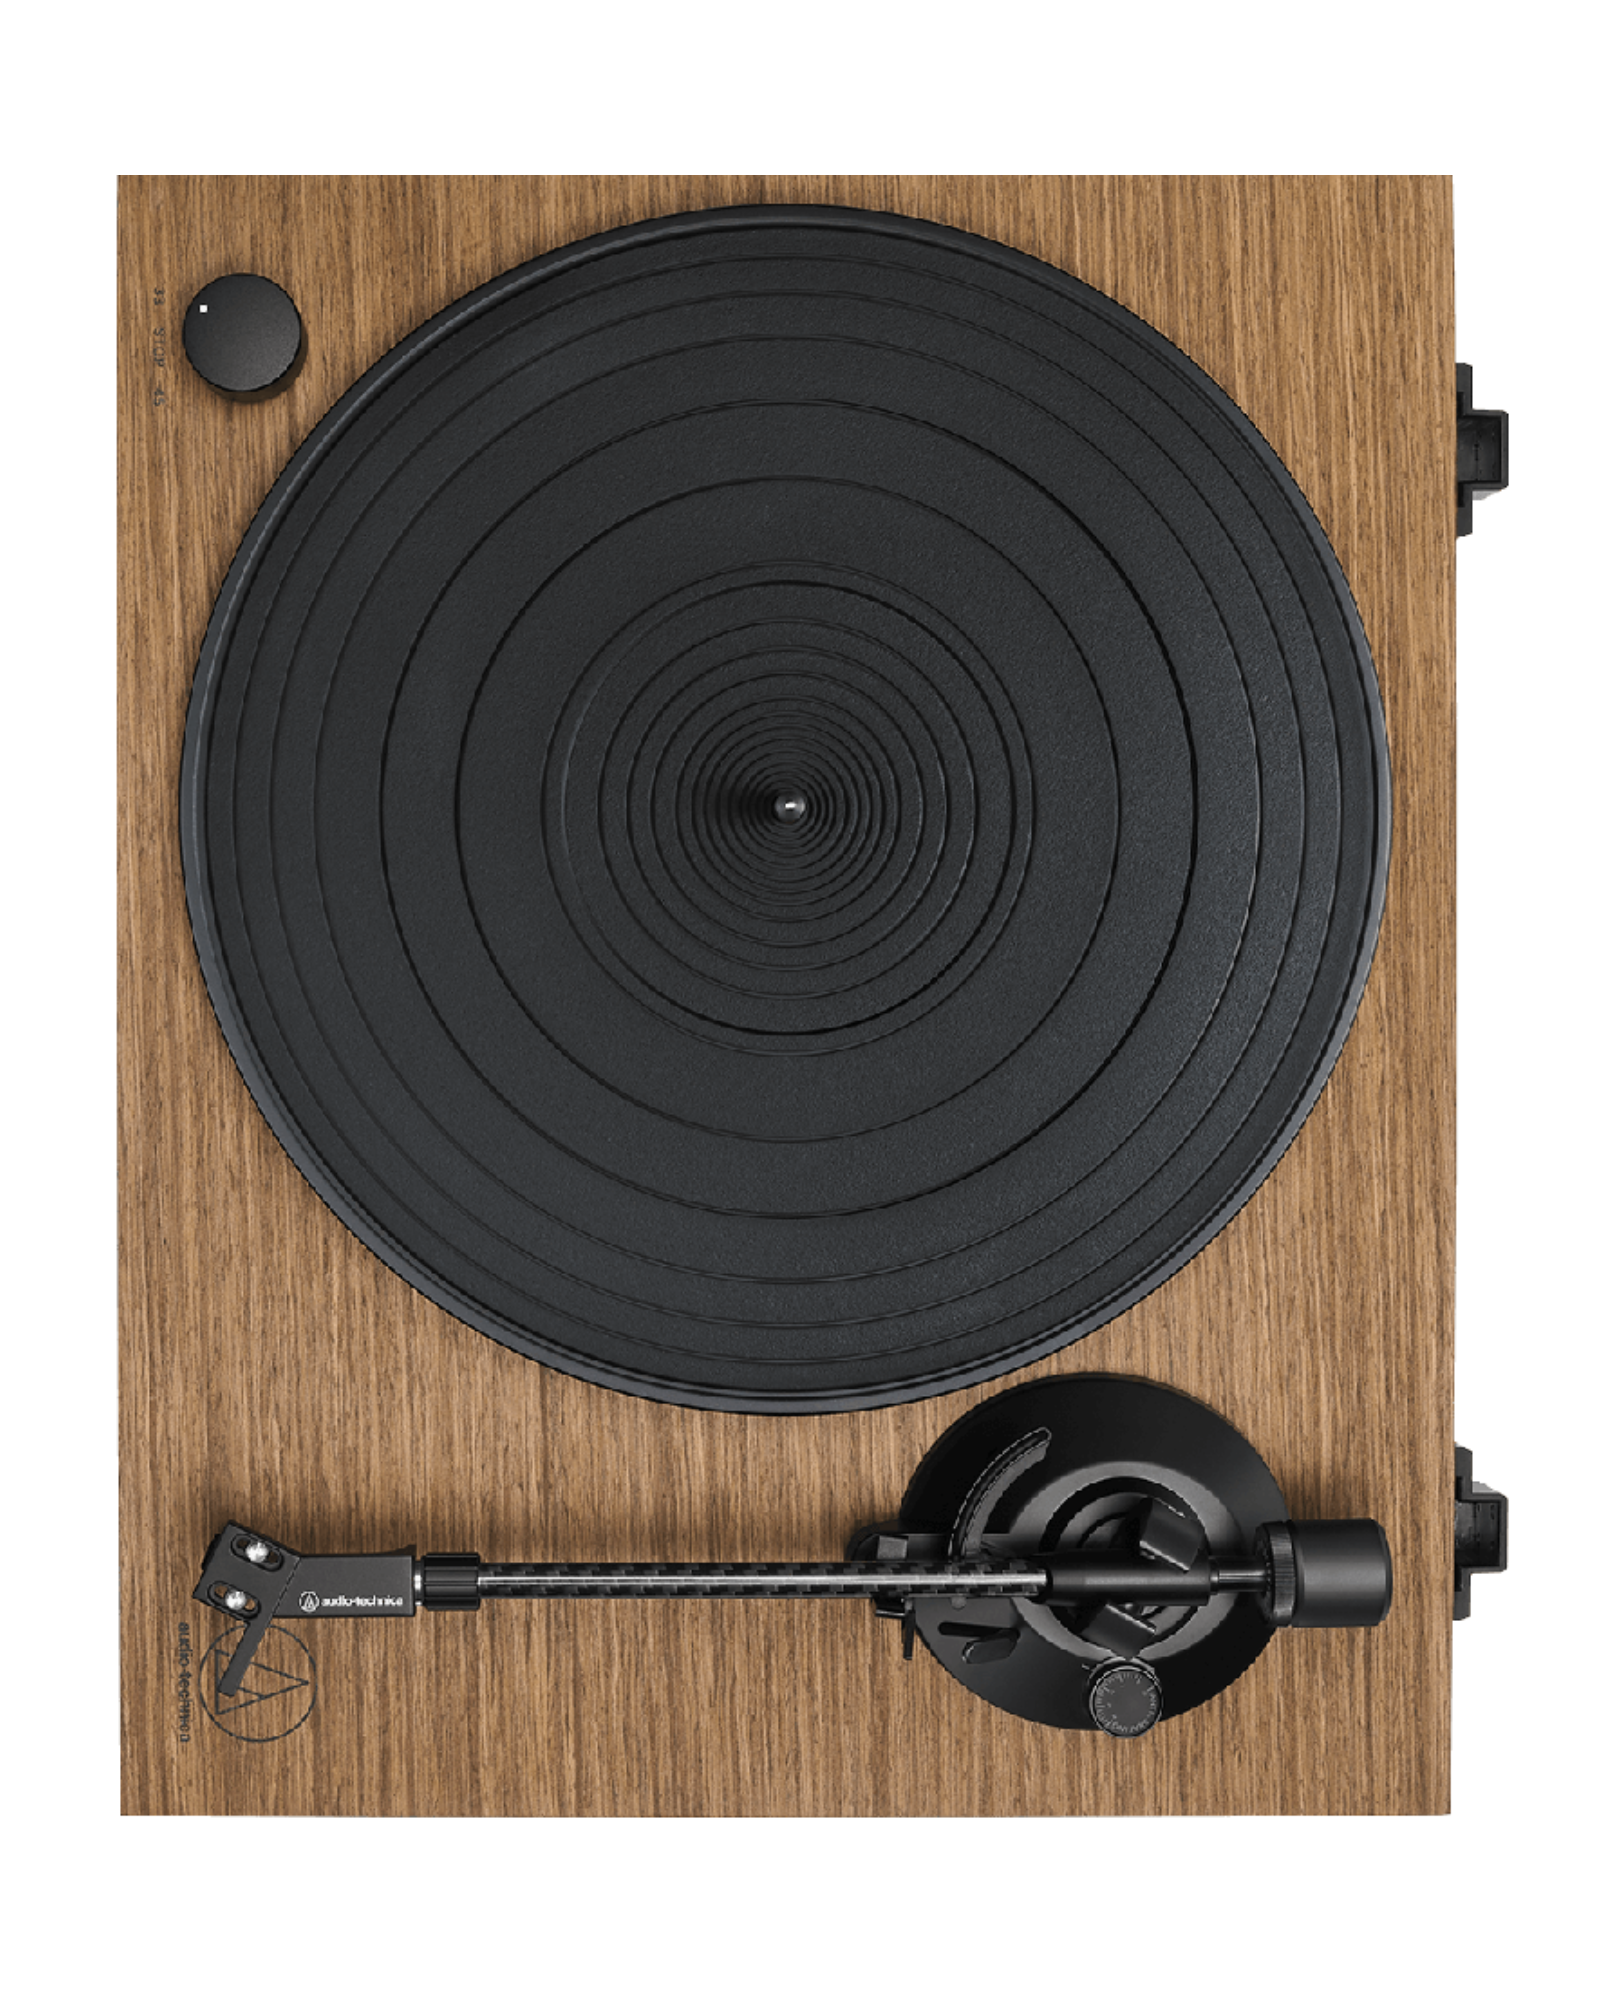 FULLY MANUAL BELT DRIVE - TURNTABLE